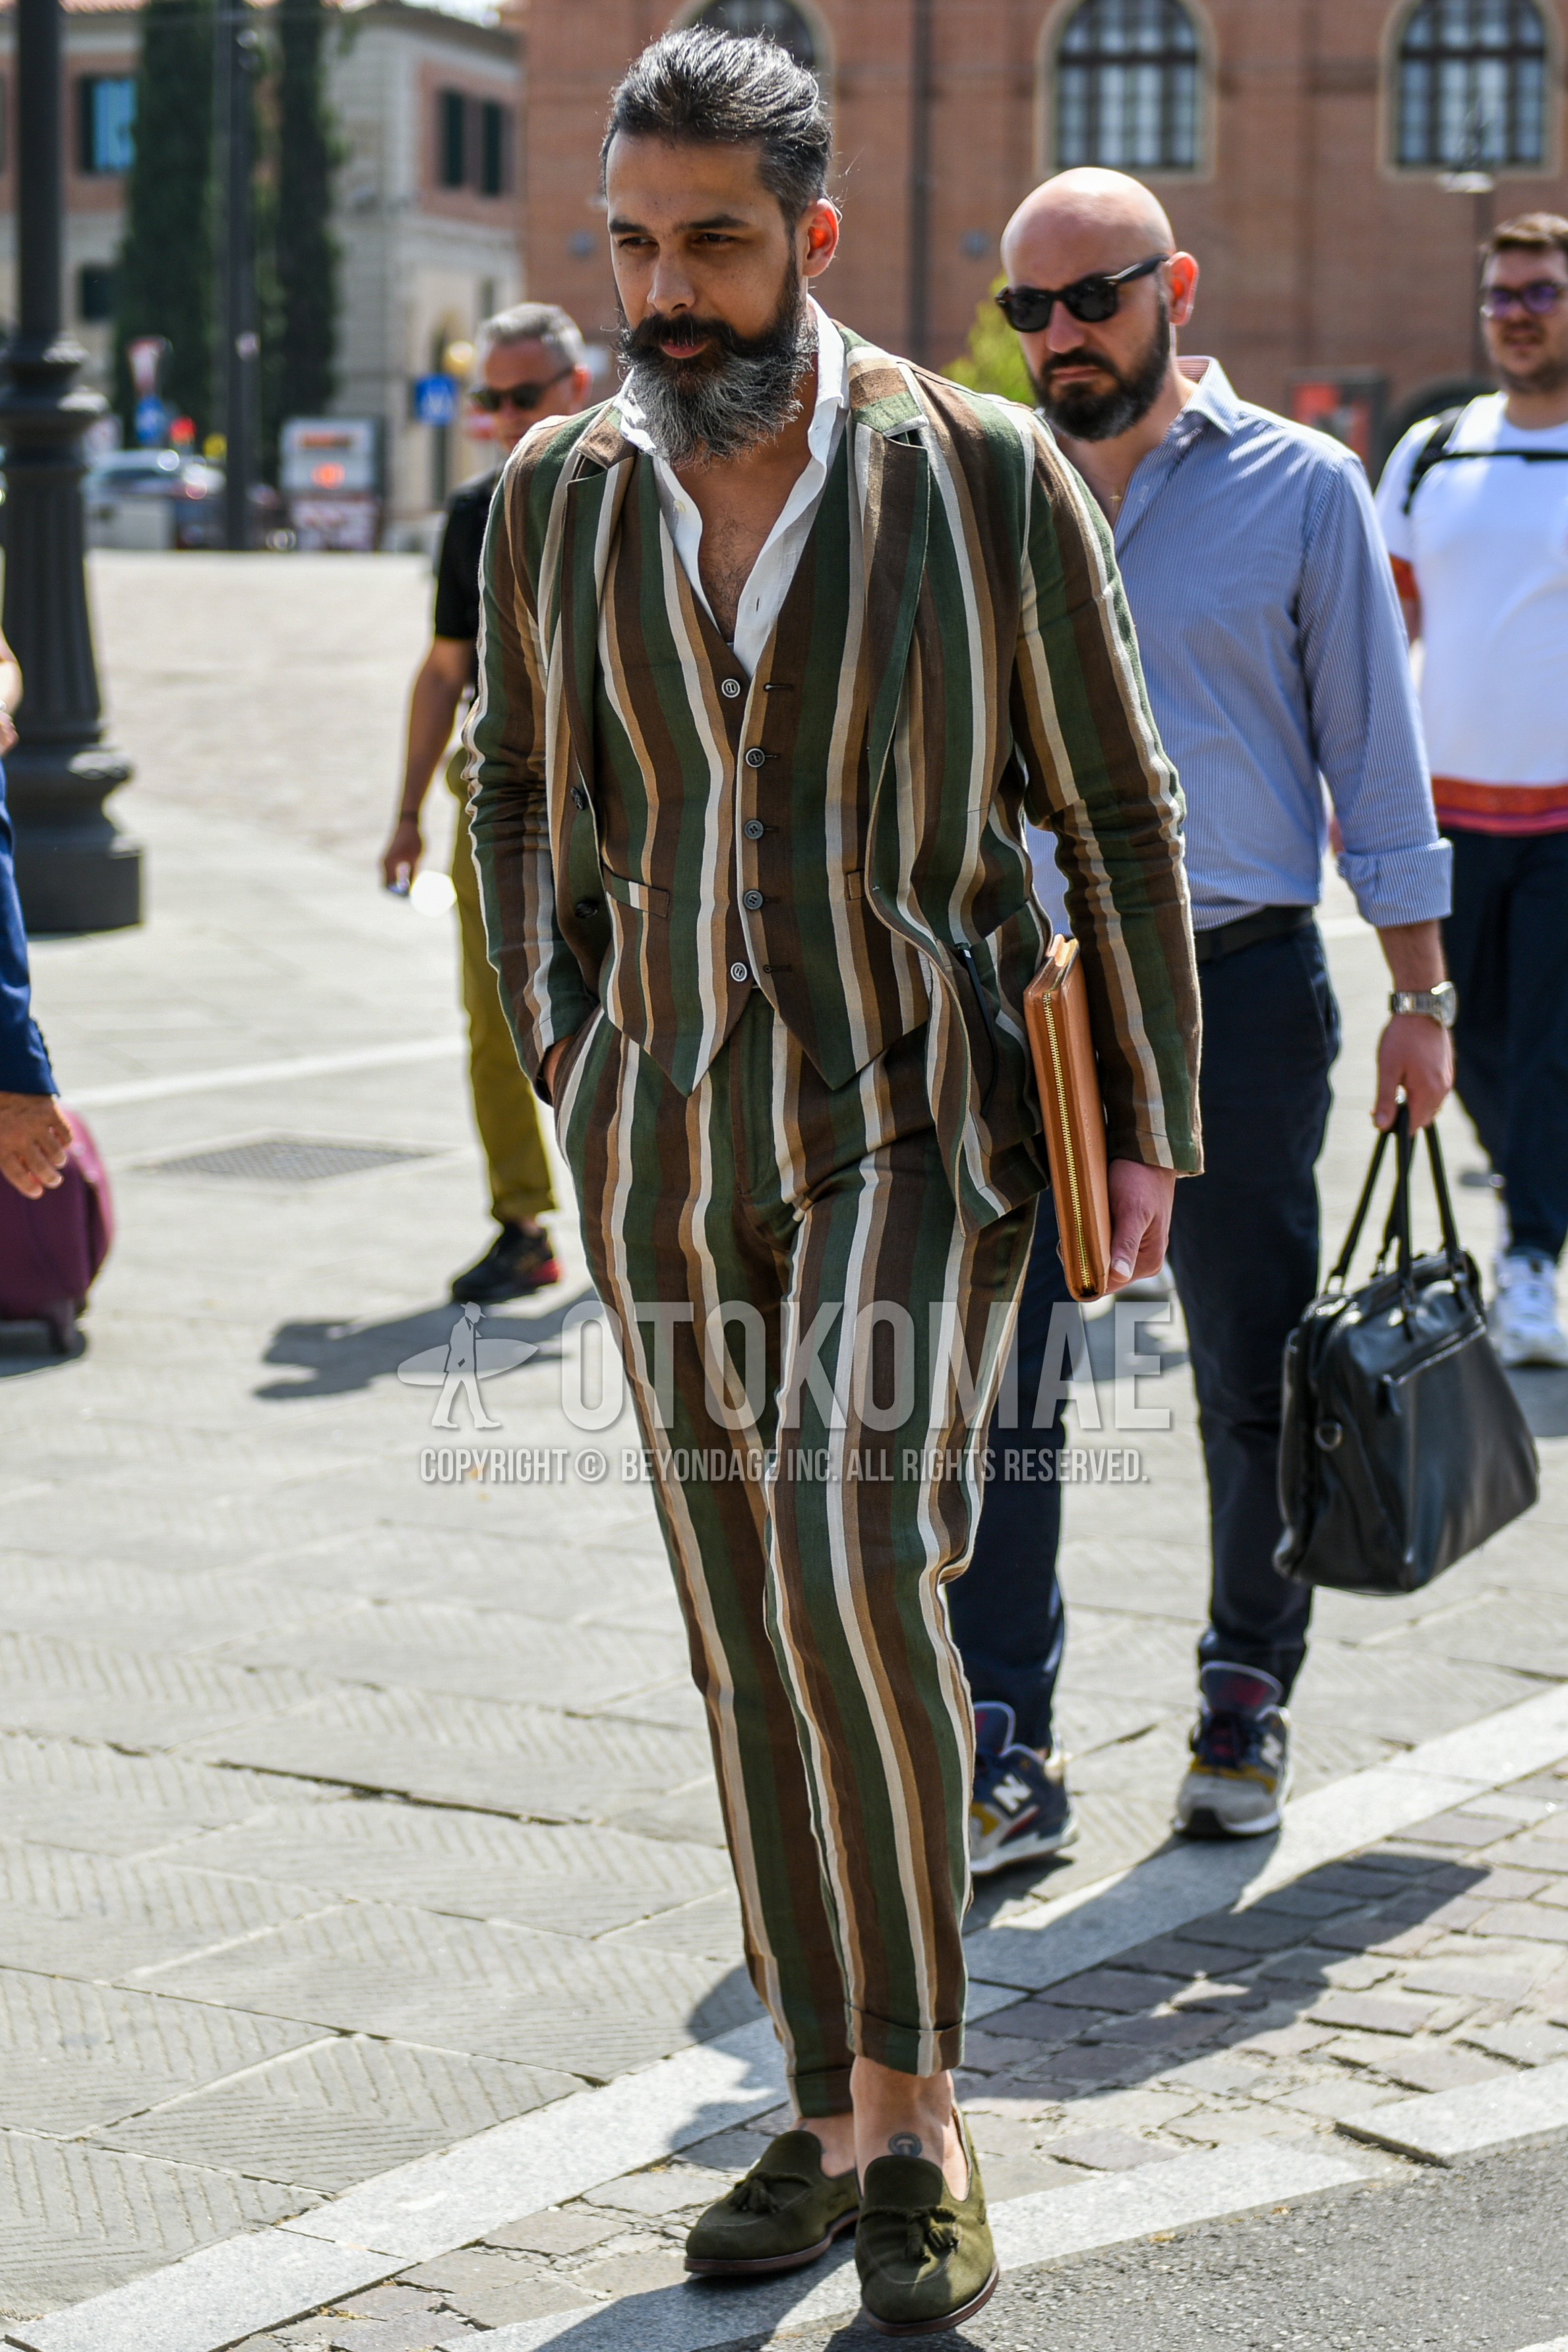 Men's spring autumn outfit with white plain shirt, green tassel loafers leather shoes, brown plain clutch bag/second bag/drawstring bag, green stripes suit.